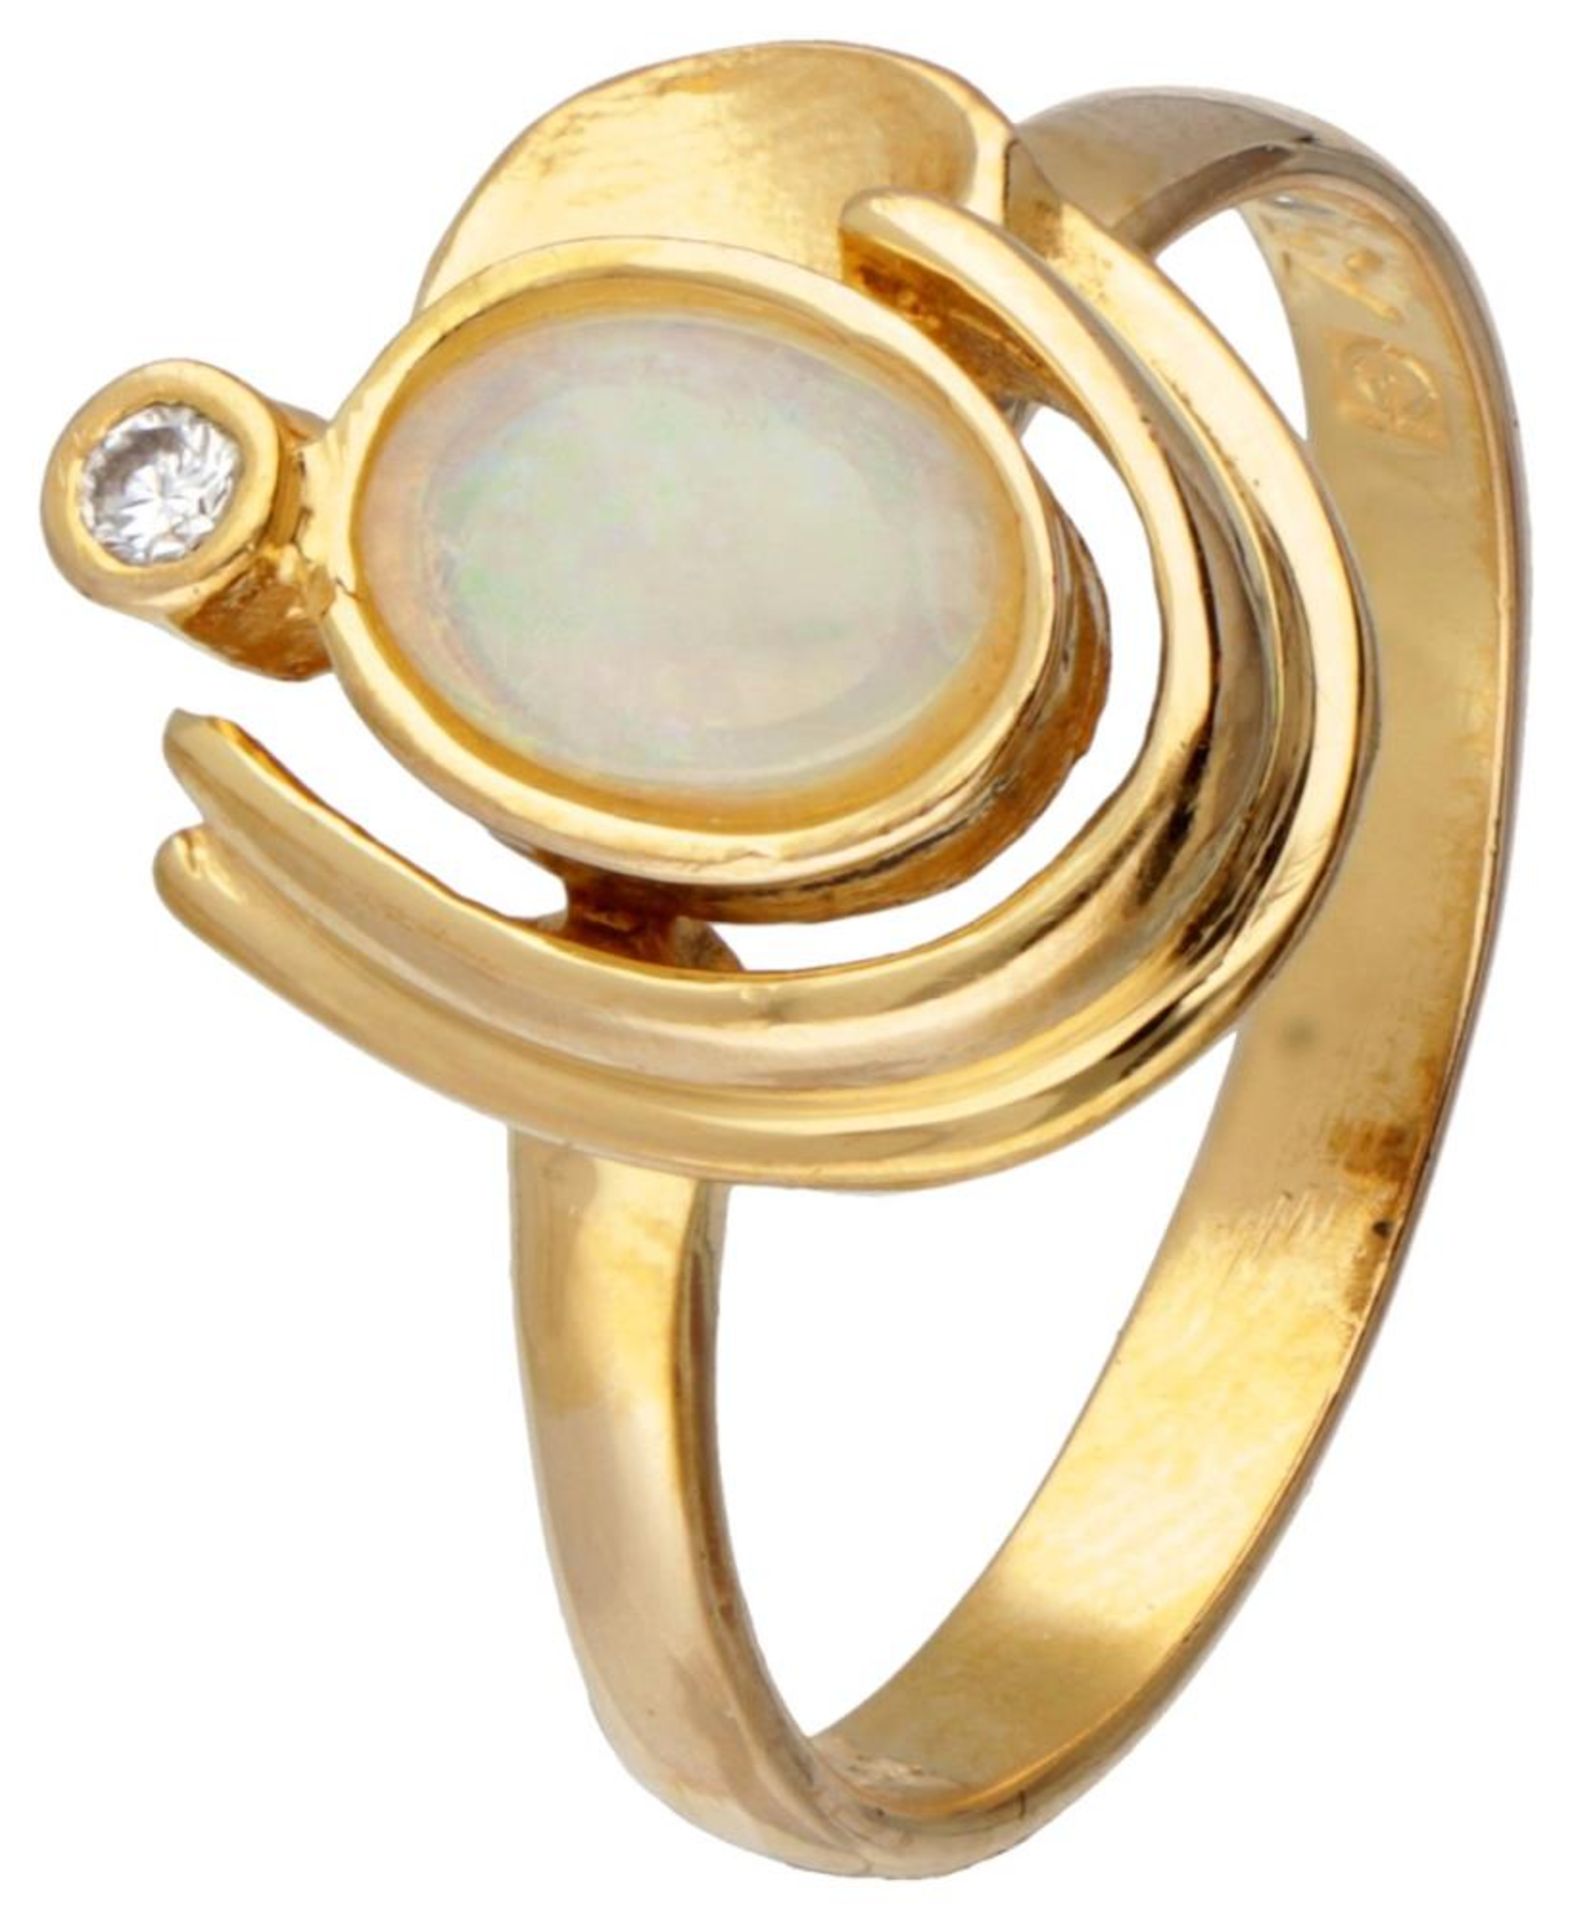 18K. Yellow gold ring set with approx. 0.42 ct. welo opal and diamond. - Image 2 of 4